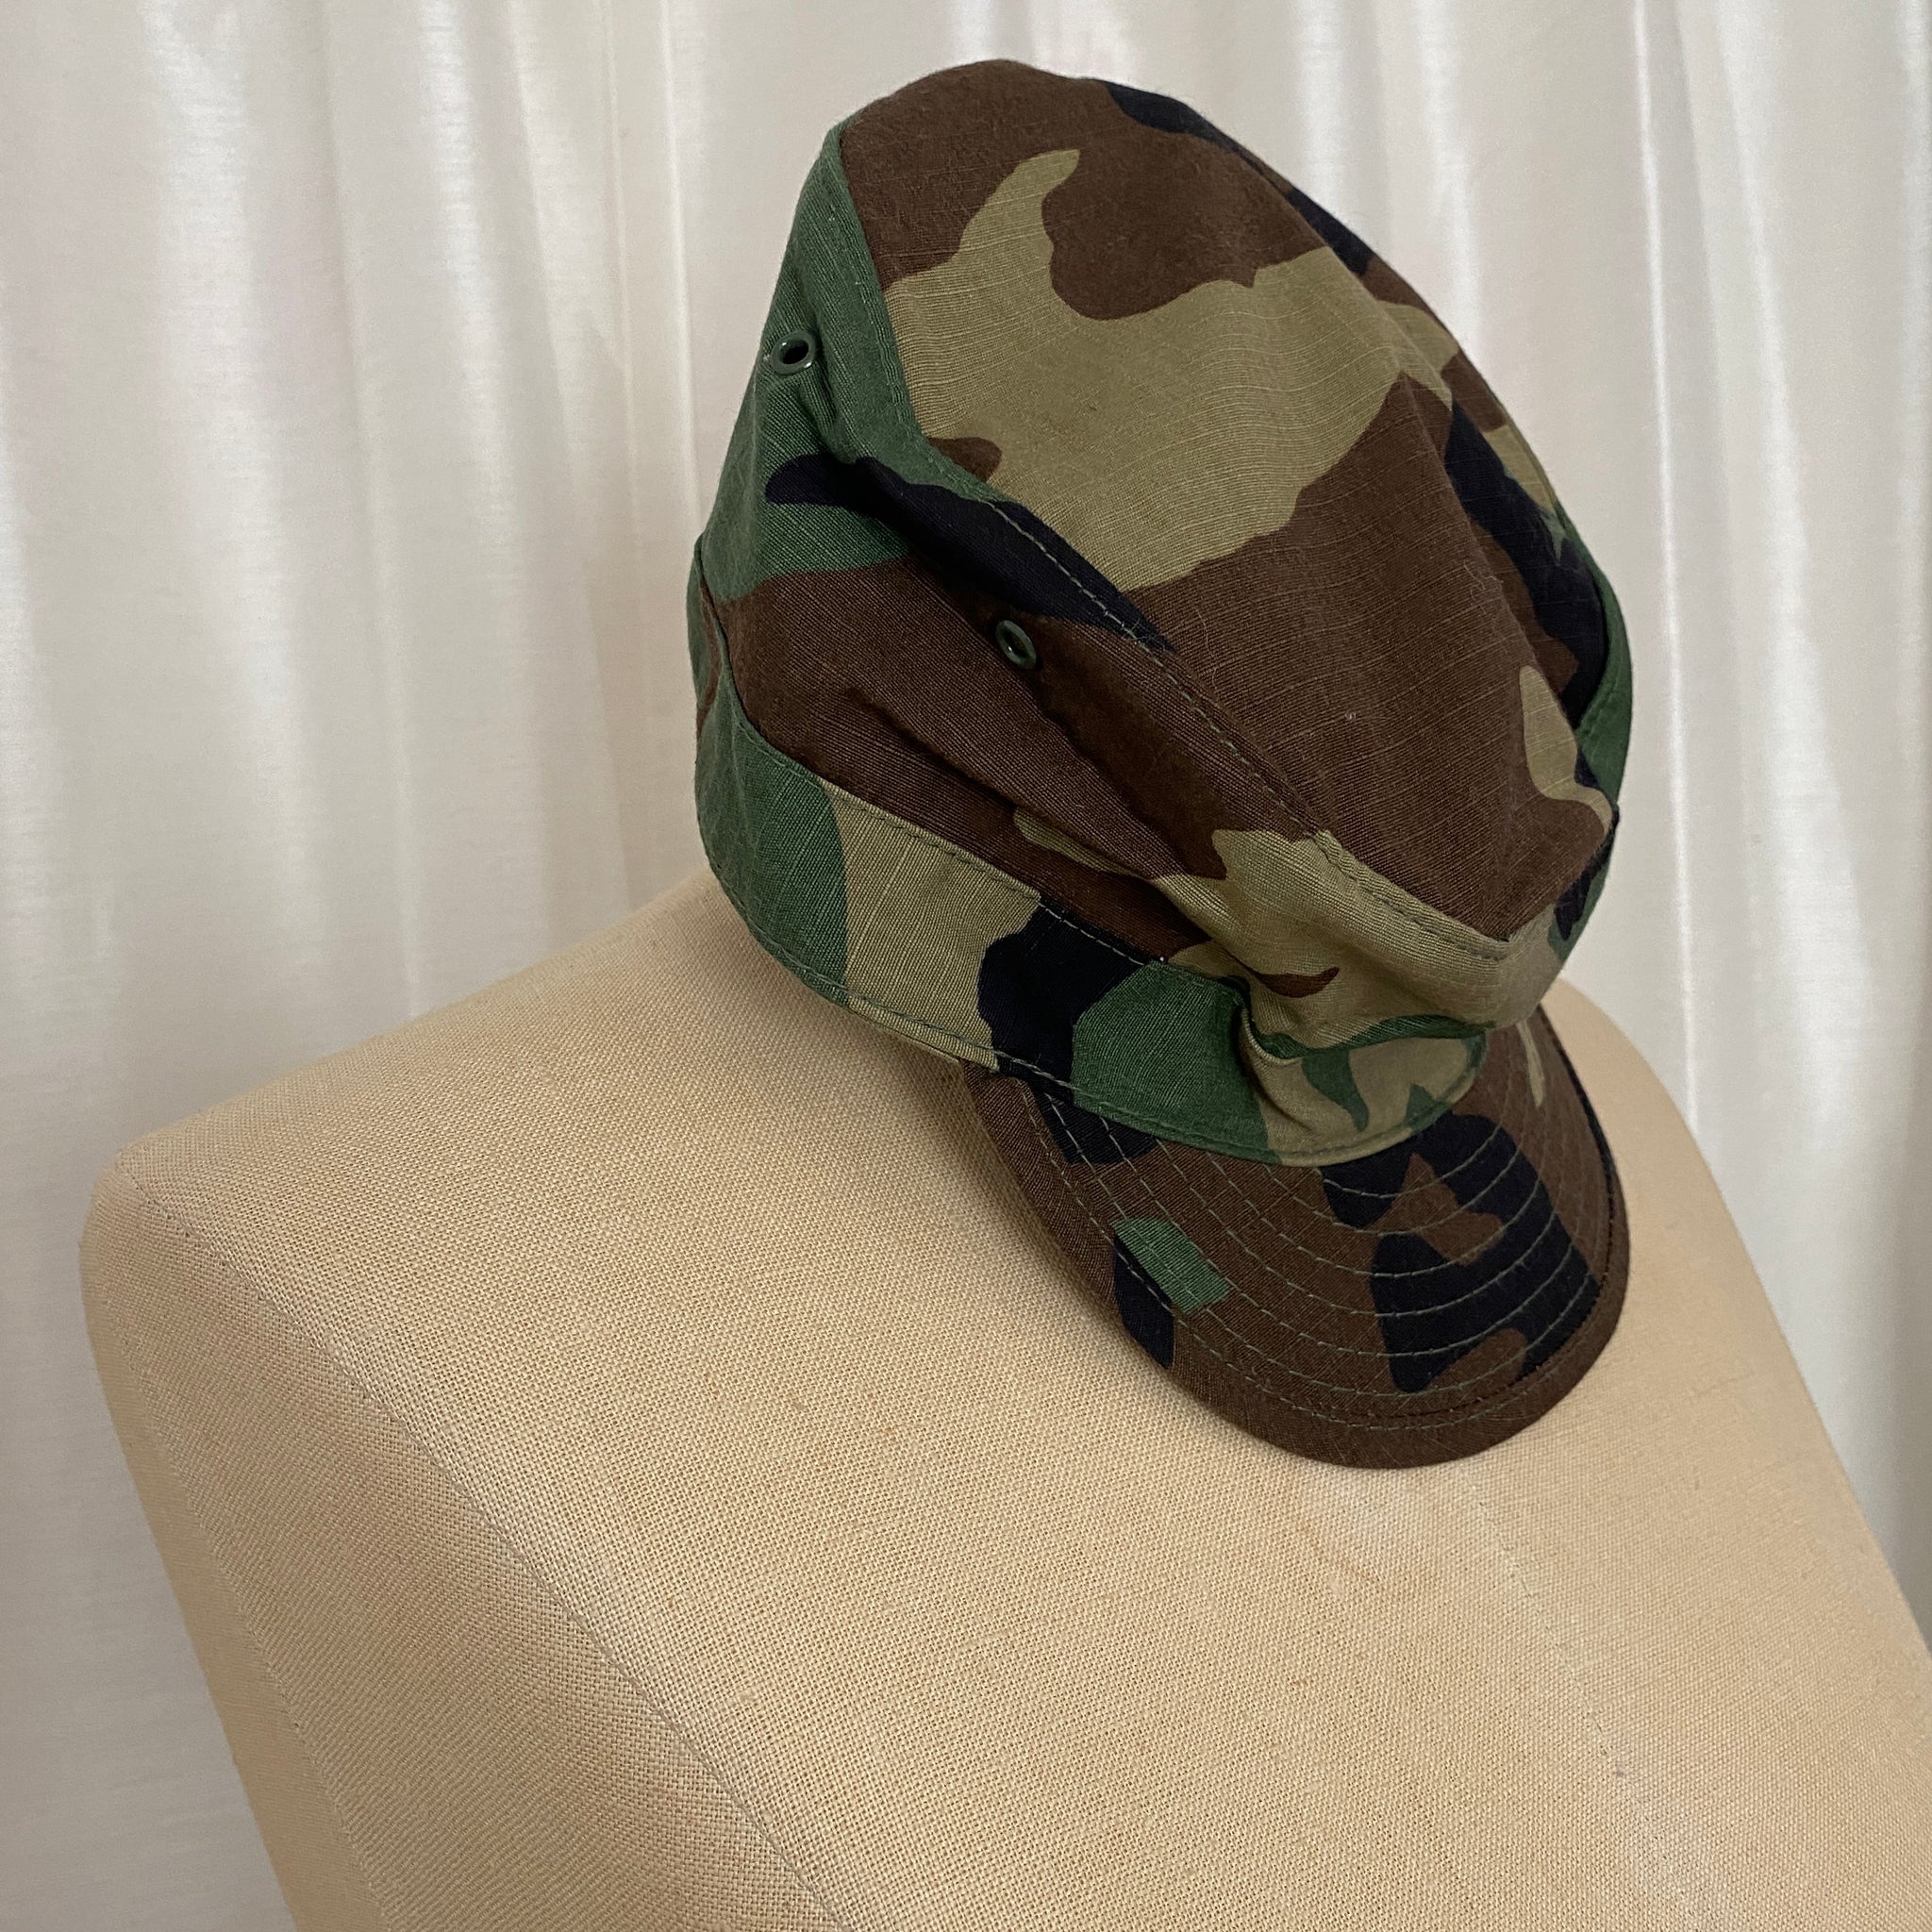 Authentic Army Camouflage Hat